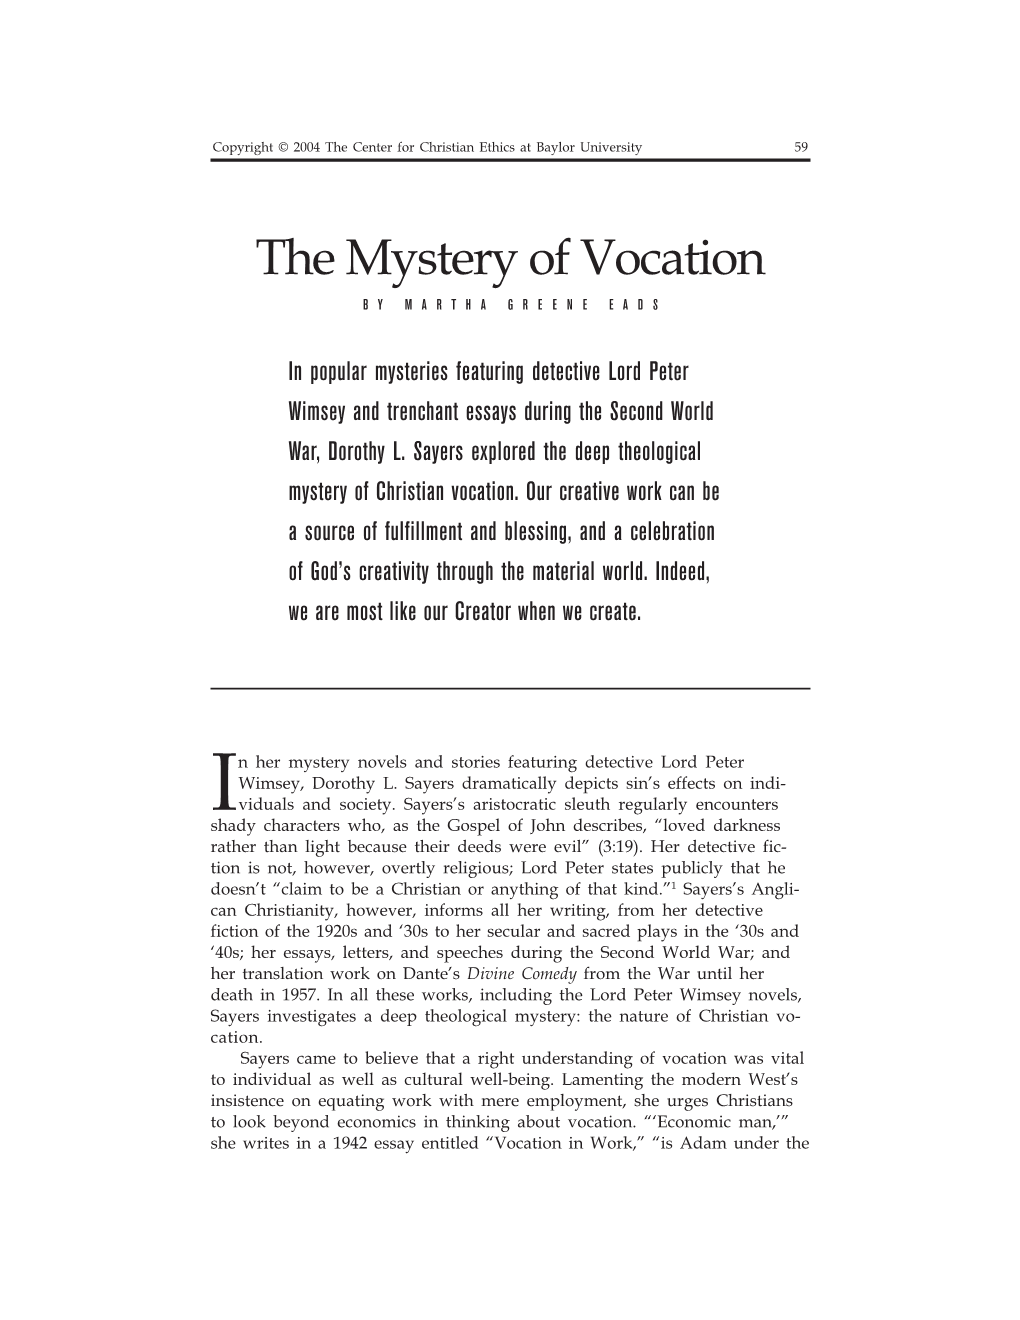 The Mystery of Vocation by MARTHA GREENE EADS